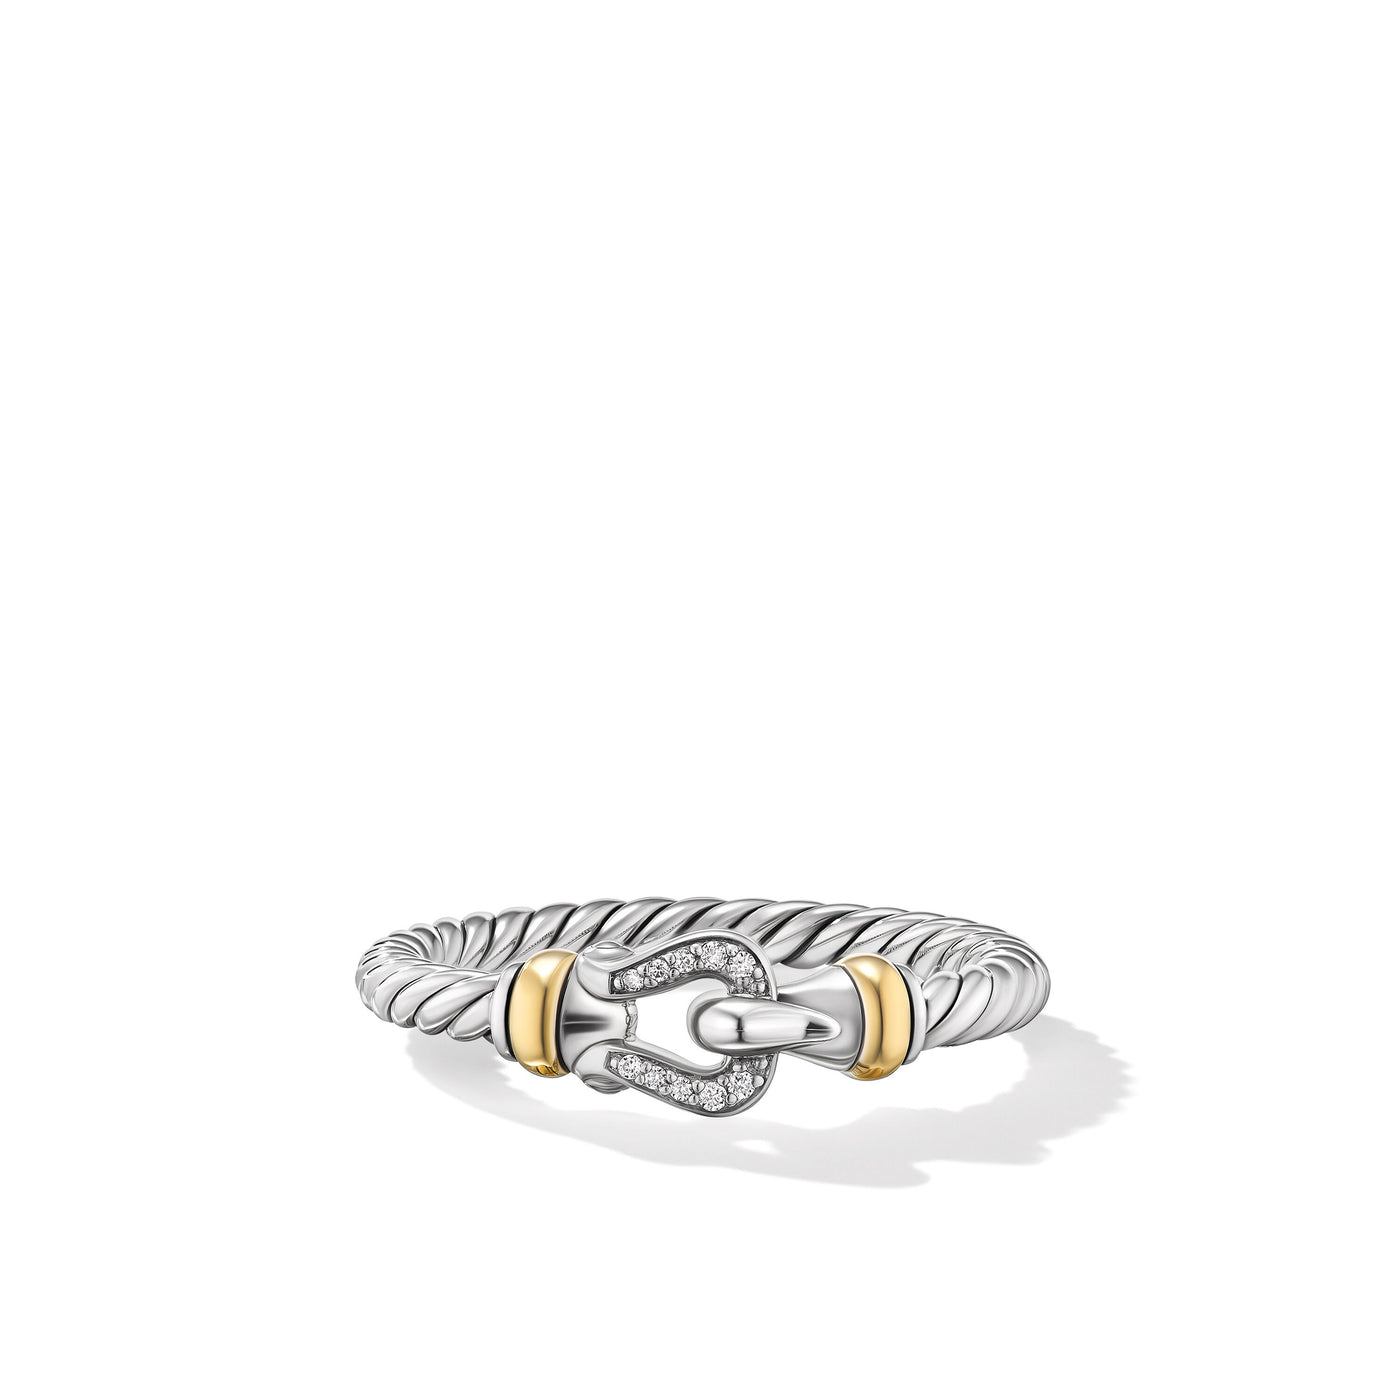 Petite Buckle Ring in Sterling Silver with 18K Yellow Gold and Diamonds\, 2mm